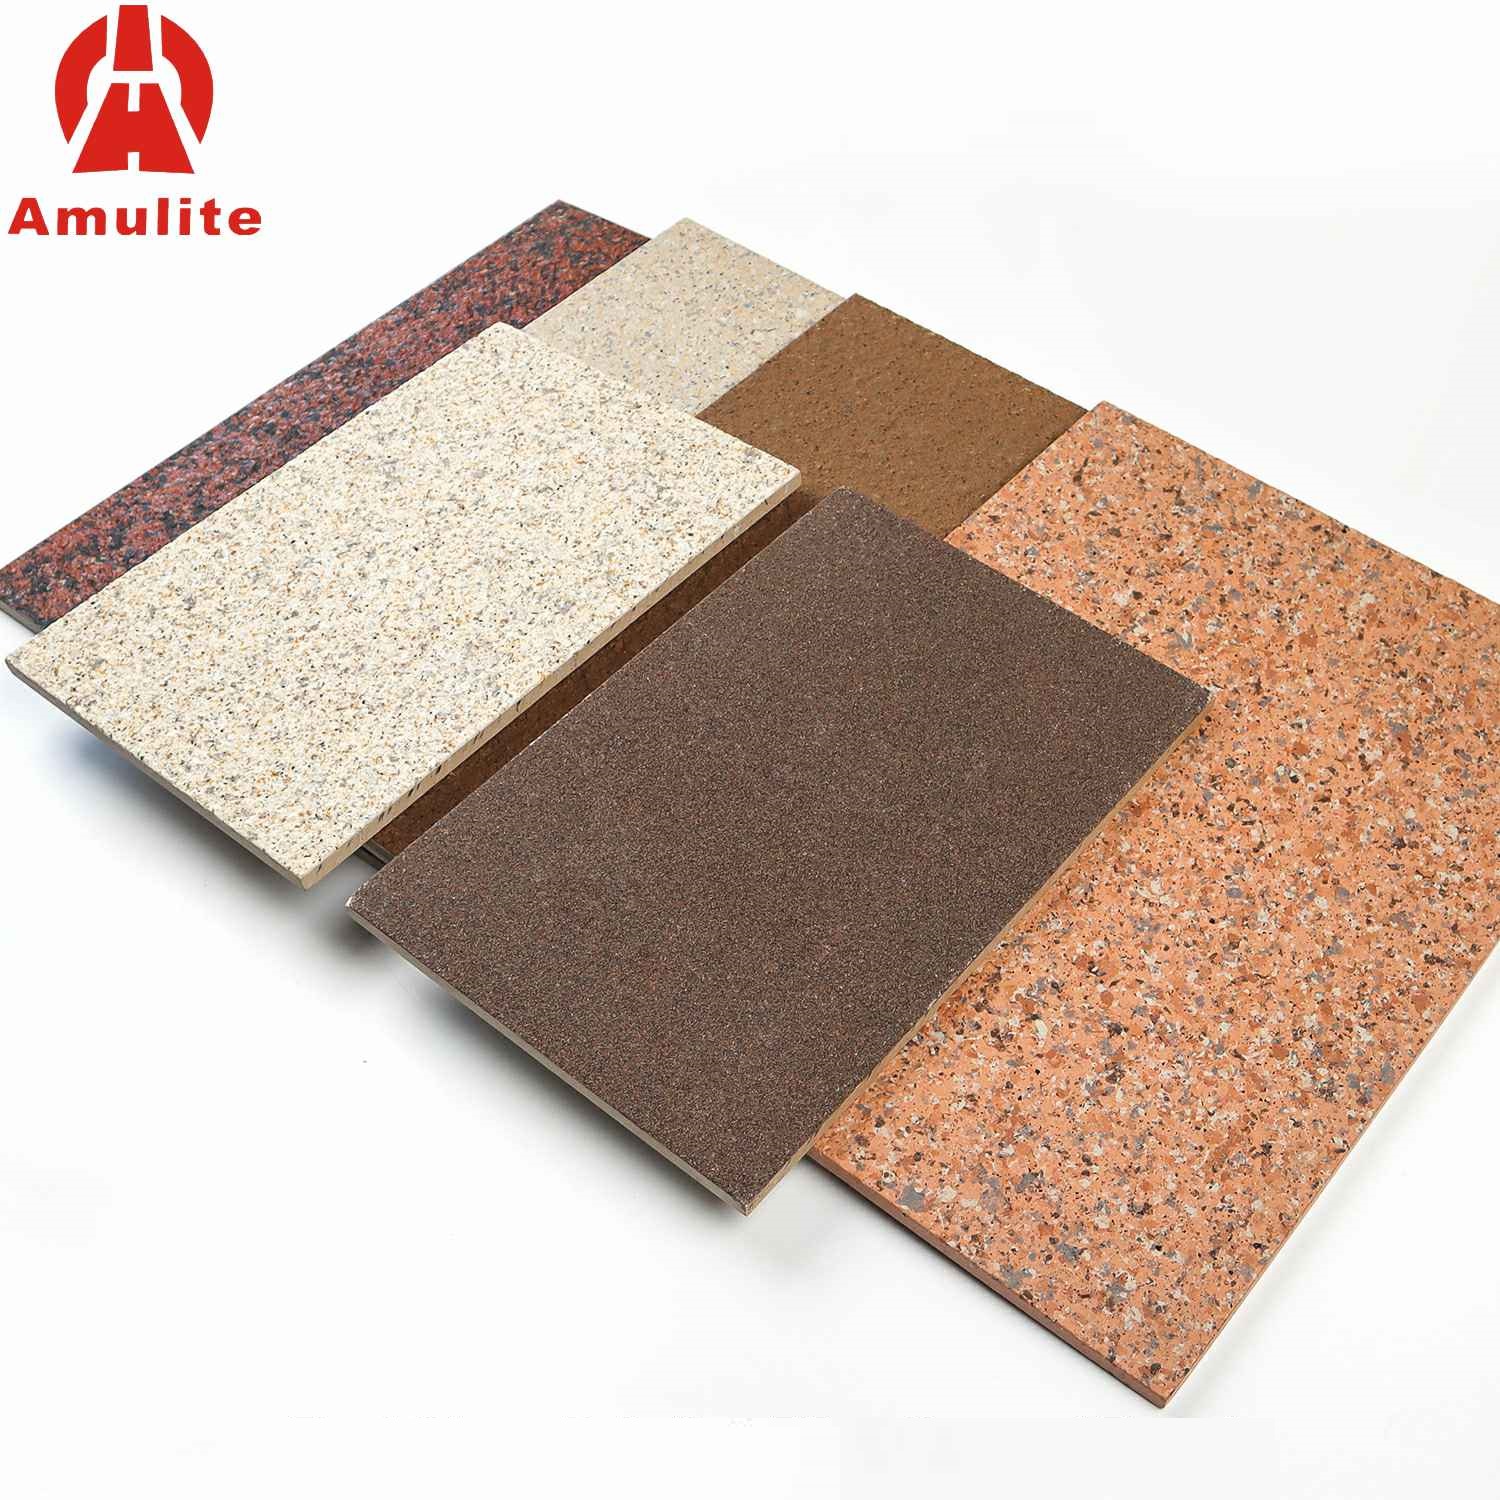 Amulite Real Stone Painting Fiber Cement Board